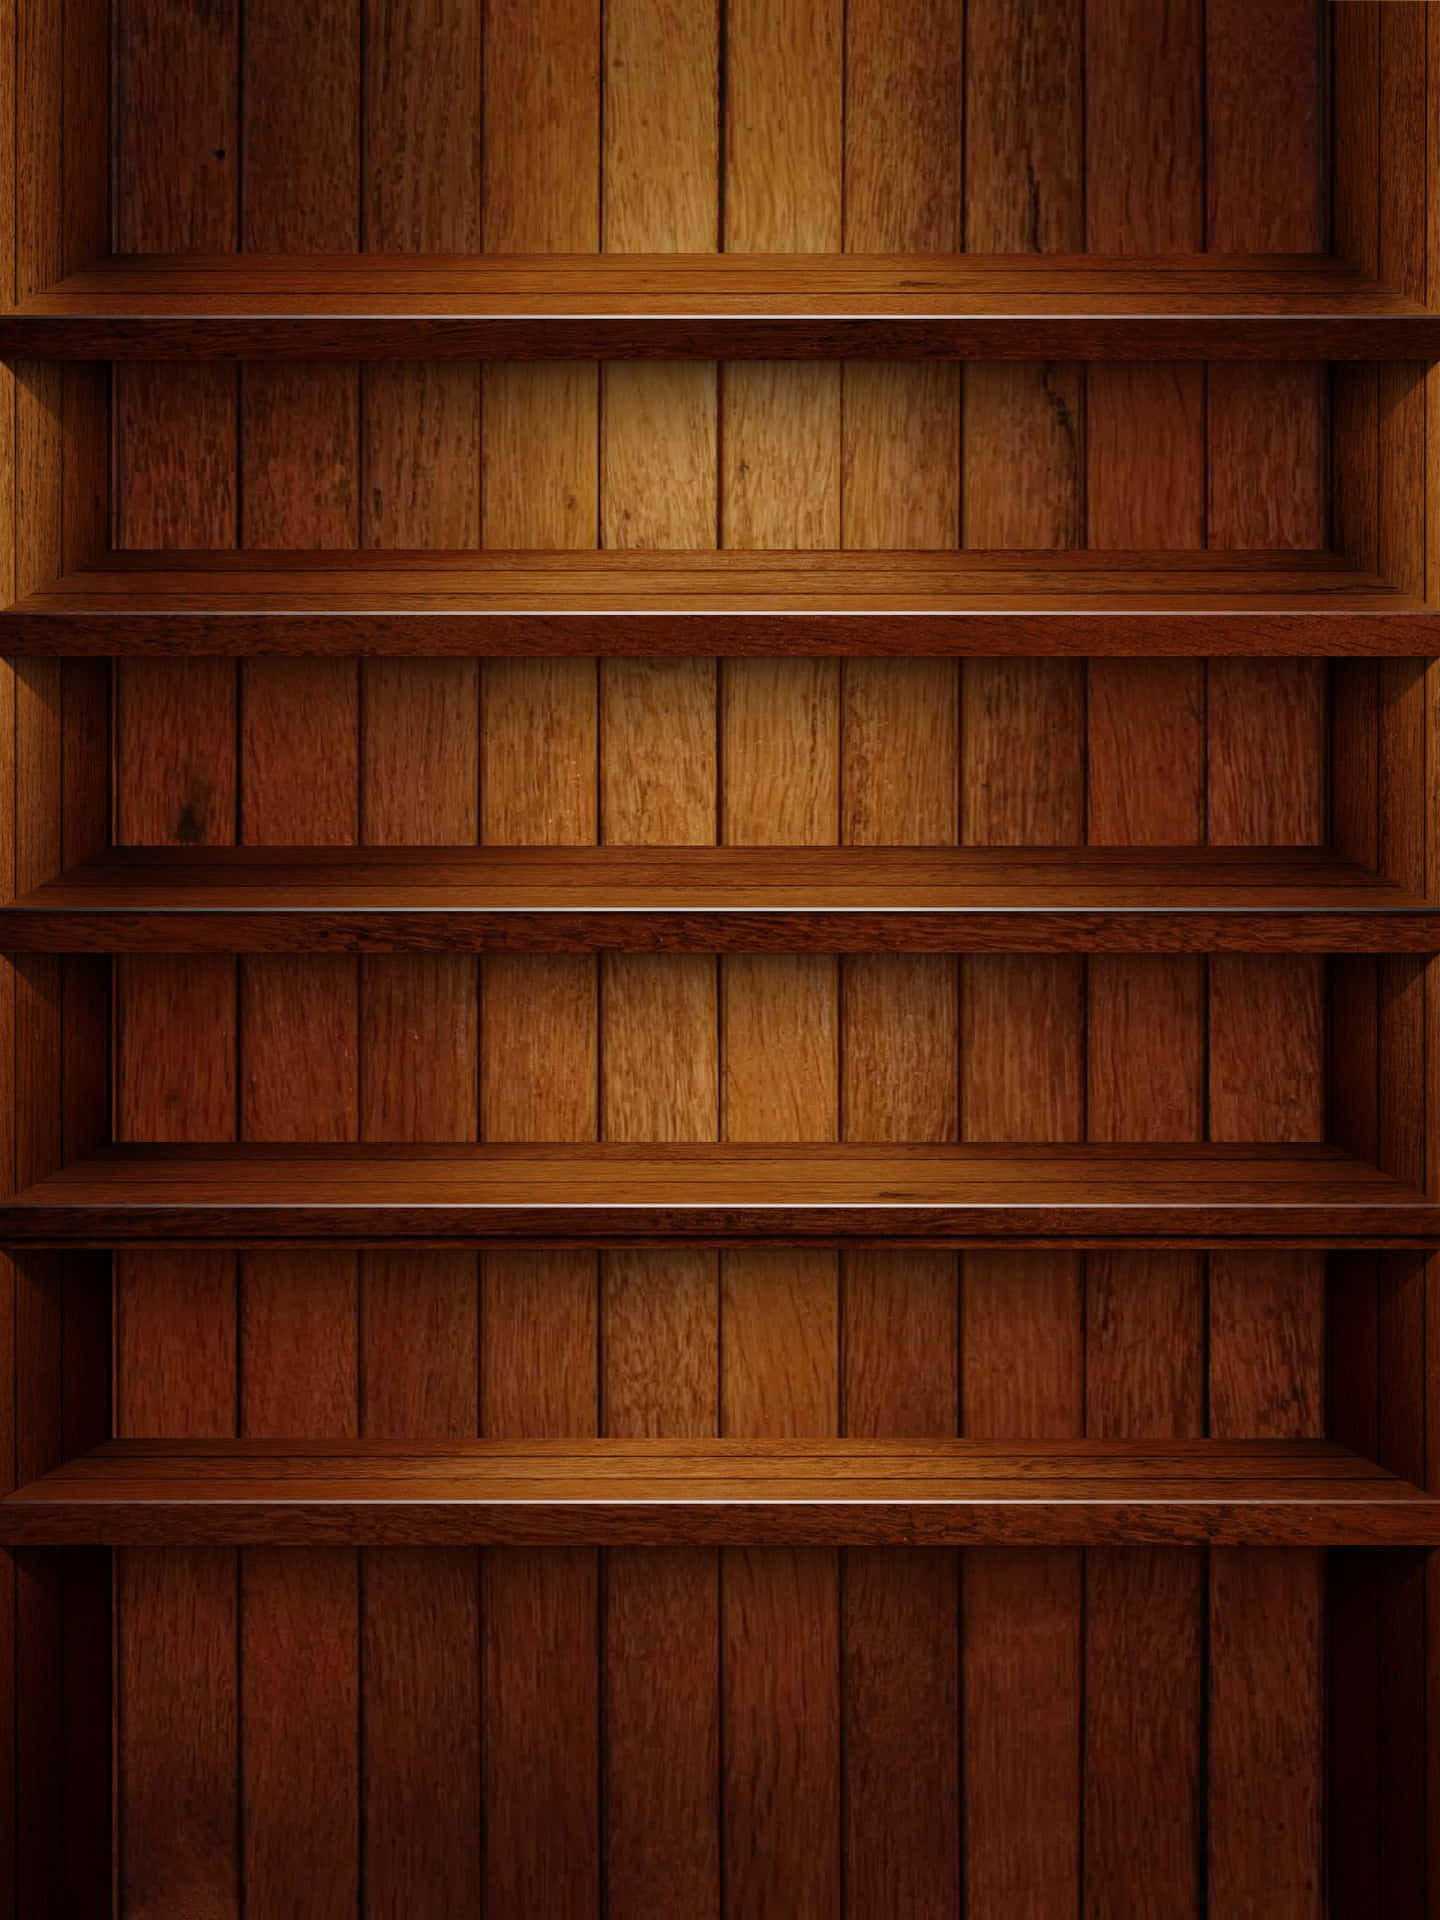 A Wooden Shelf With Shelves On It